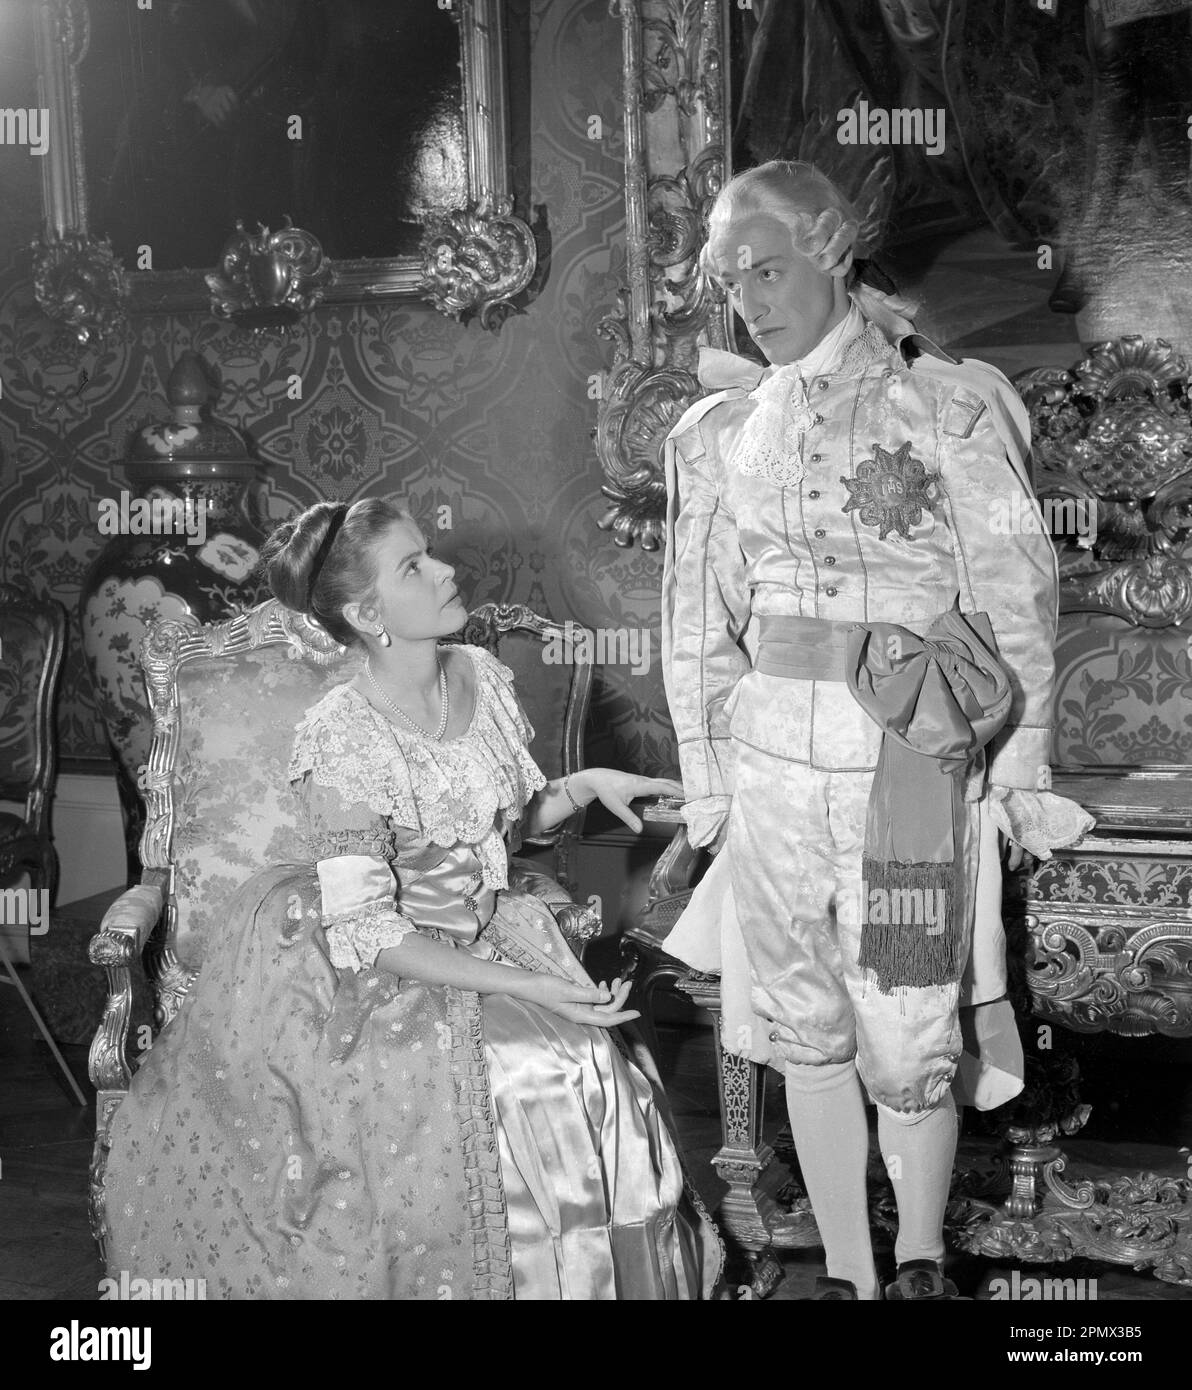 As if in the 18th century. Actors Stig Grybe and Maj-Britt Nilsson in a scene taken inside the royal castle Drottningholm in Stockholm. The photograph was originally published to illustrate a historic novel running in several episodes in a magazine 1956. The room, furniture and clothing are typical of the 18th century Sweden. Conard ref EC3168 Stock Photo